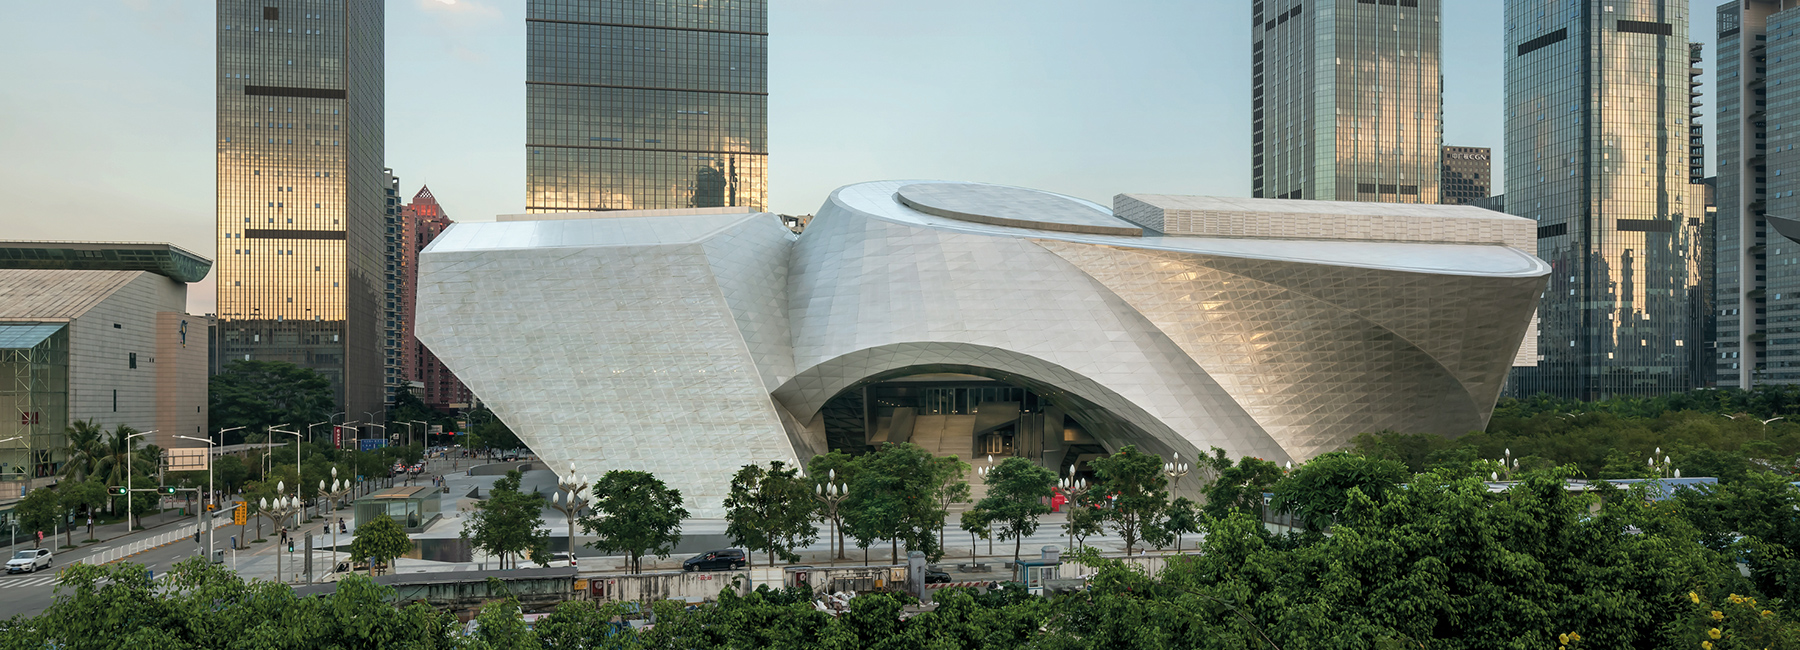 coop himmelb(l)au completes MOCAPE, an art and culture complex in shenzhen